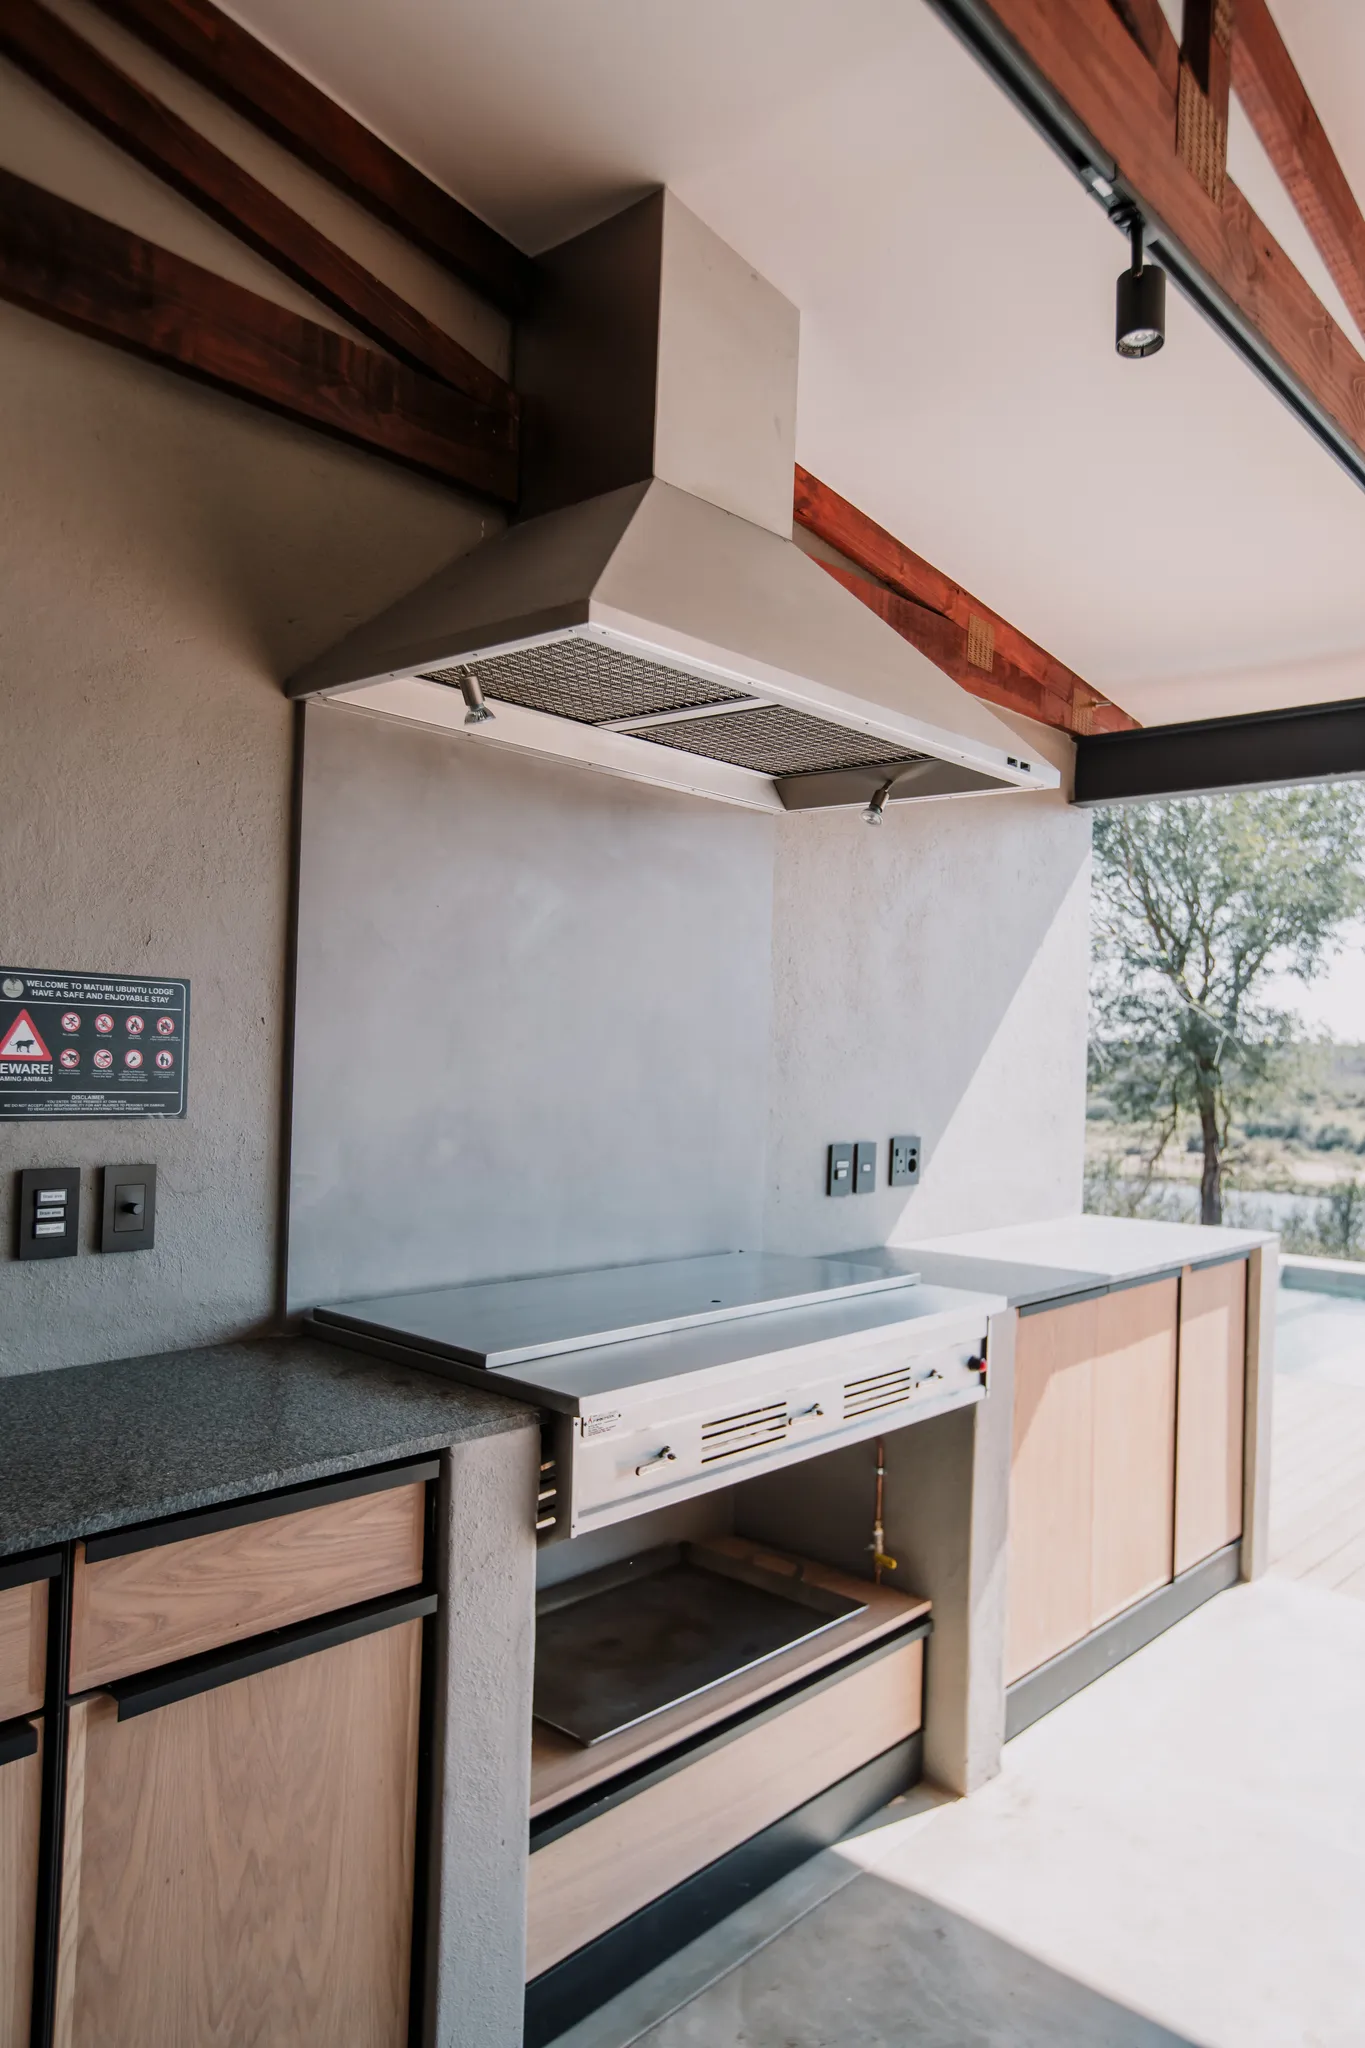 An outdoor kitchen with a braai and stove hood.